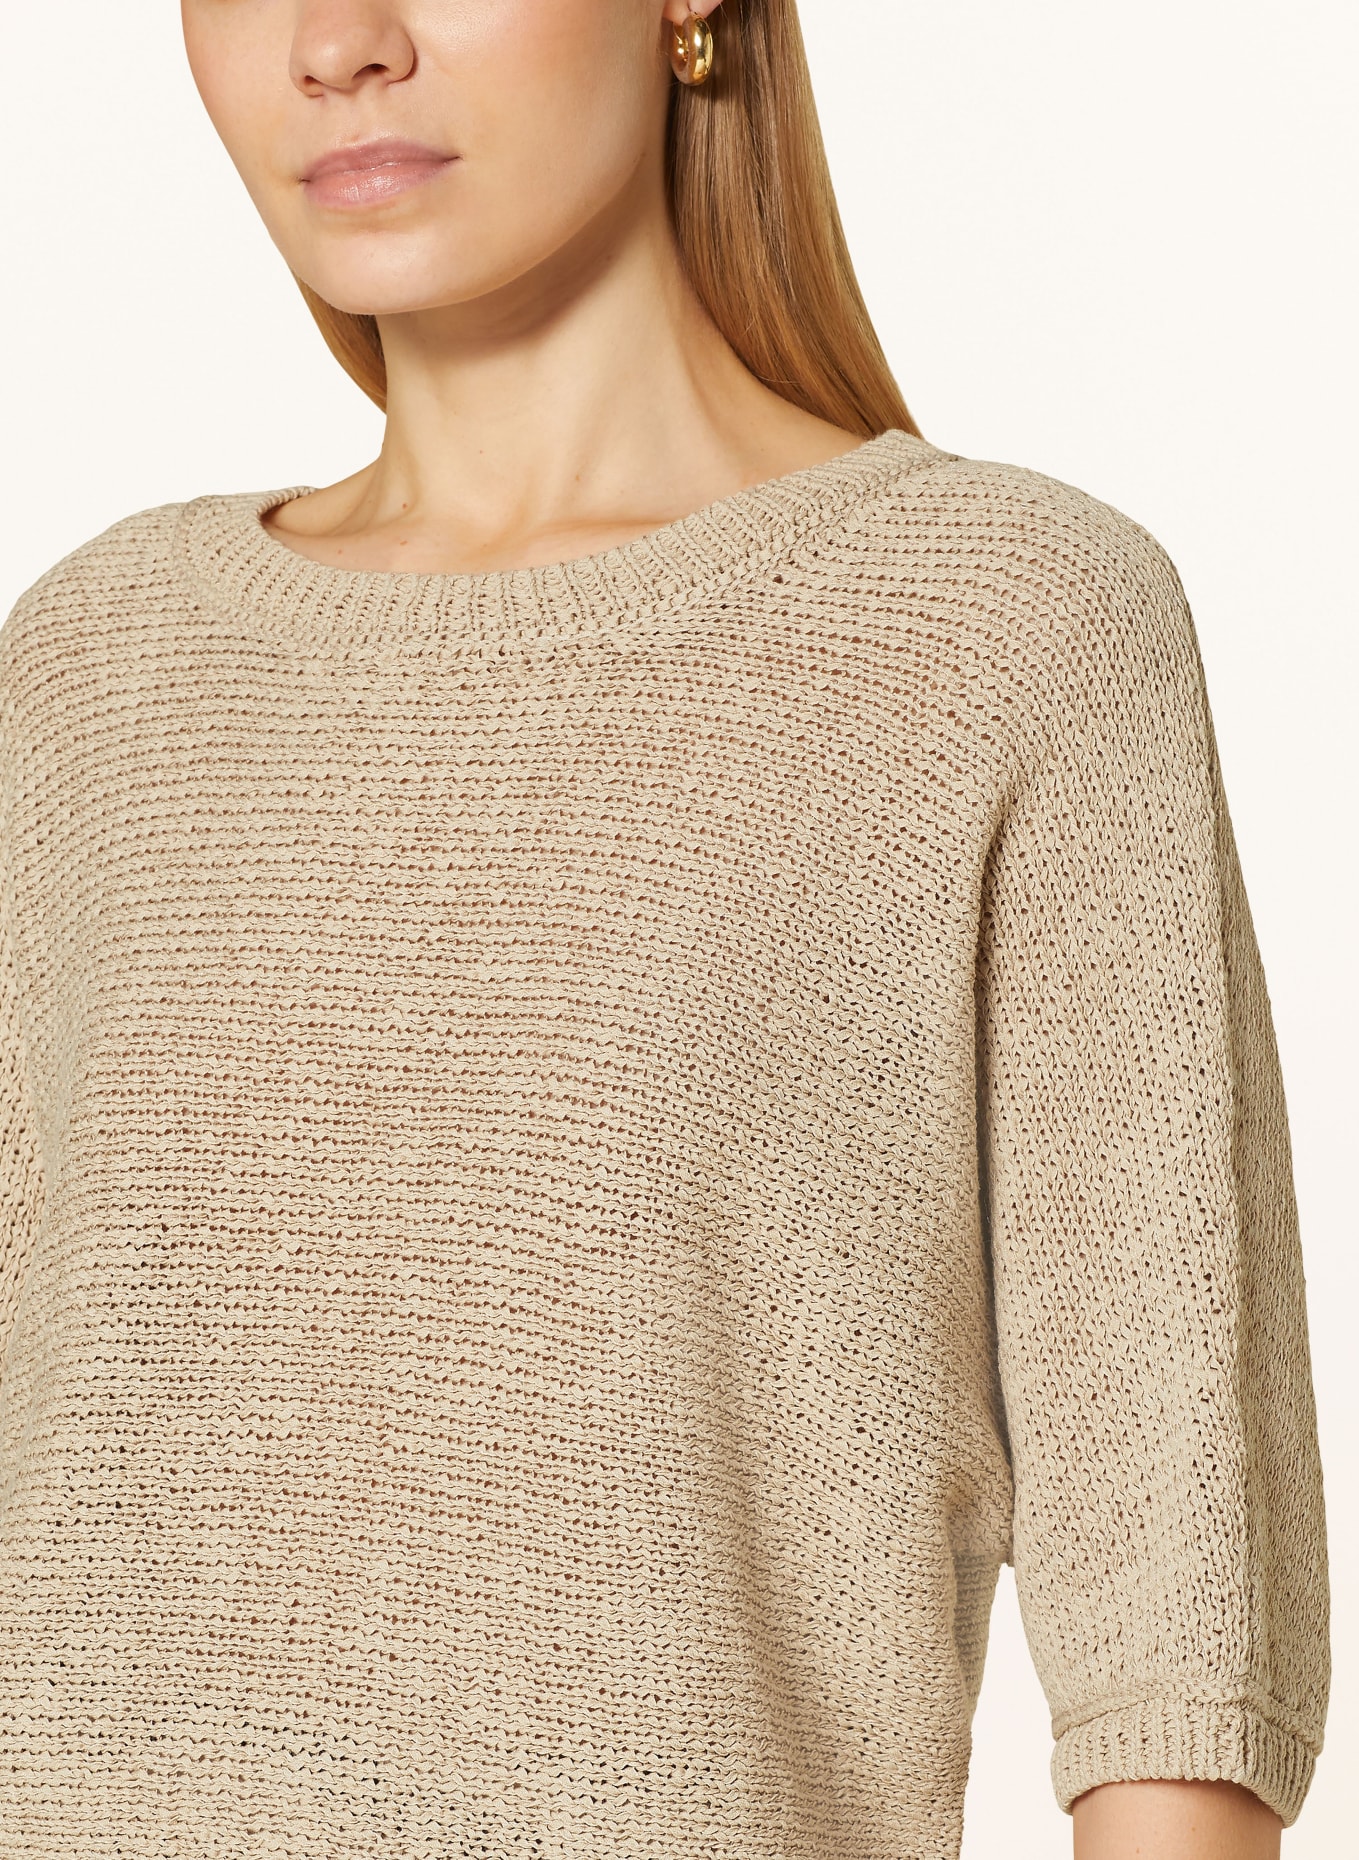 Miss Lagotte Cropped sweater with 3/4 sleeves, Color: BEIGE (Image 4)